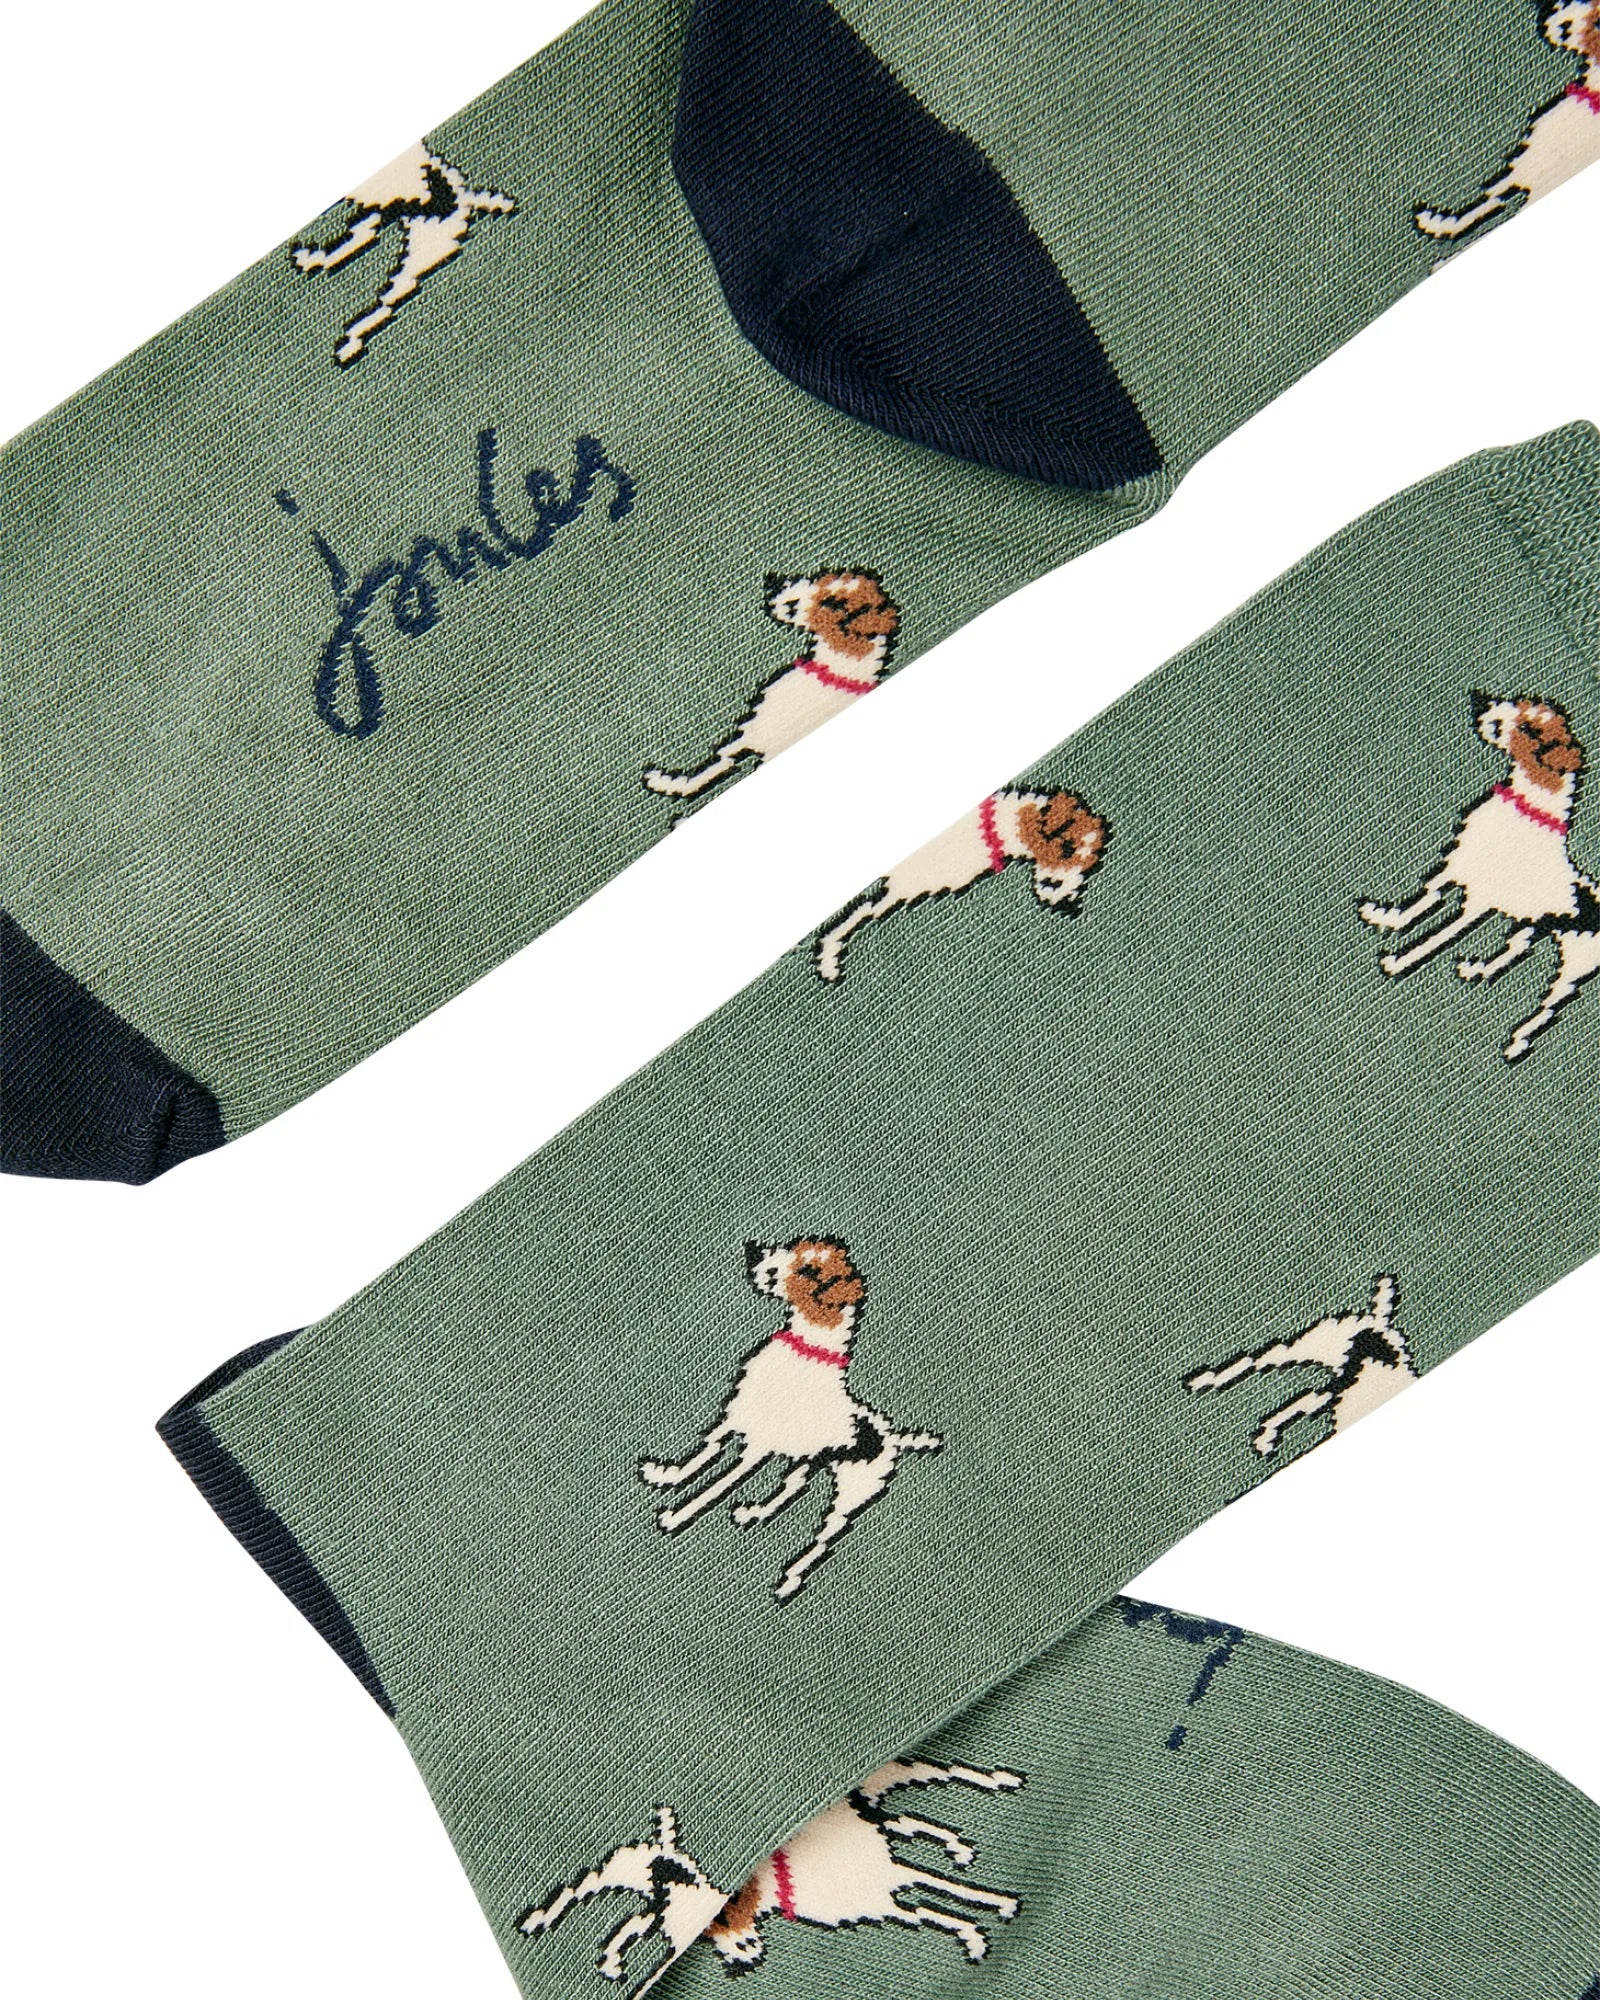 Excellent Everyday Pair Of Socks - Green Dog